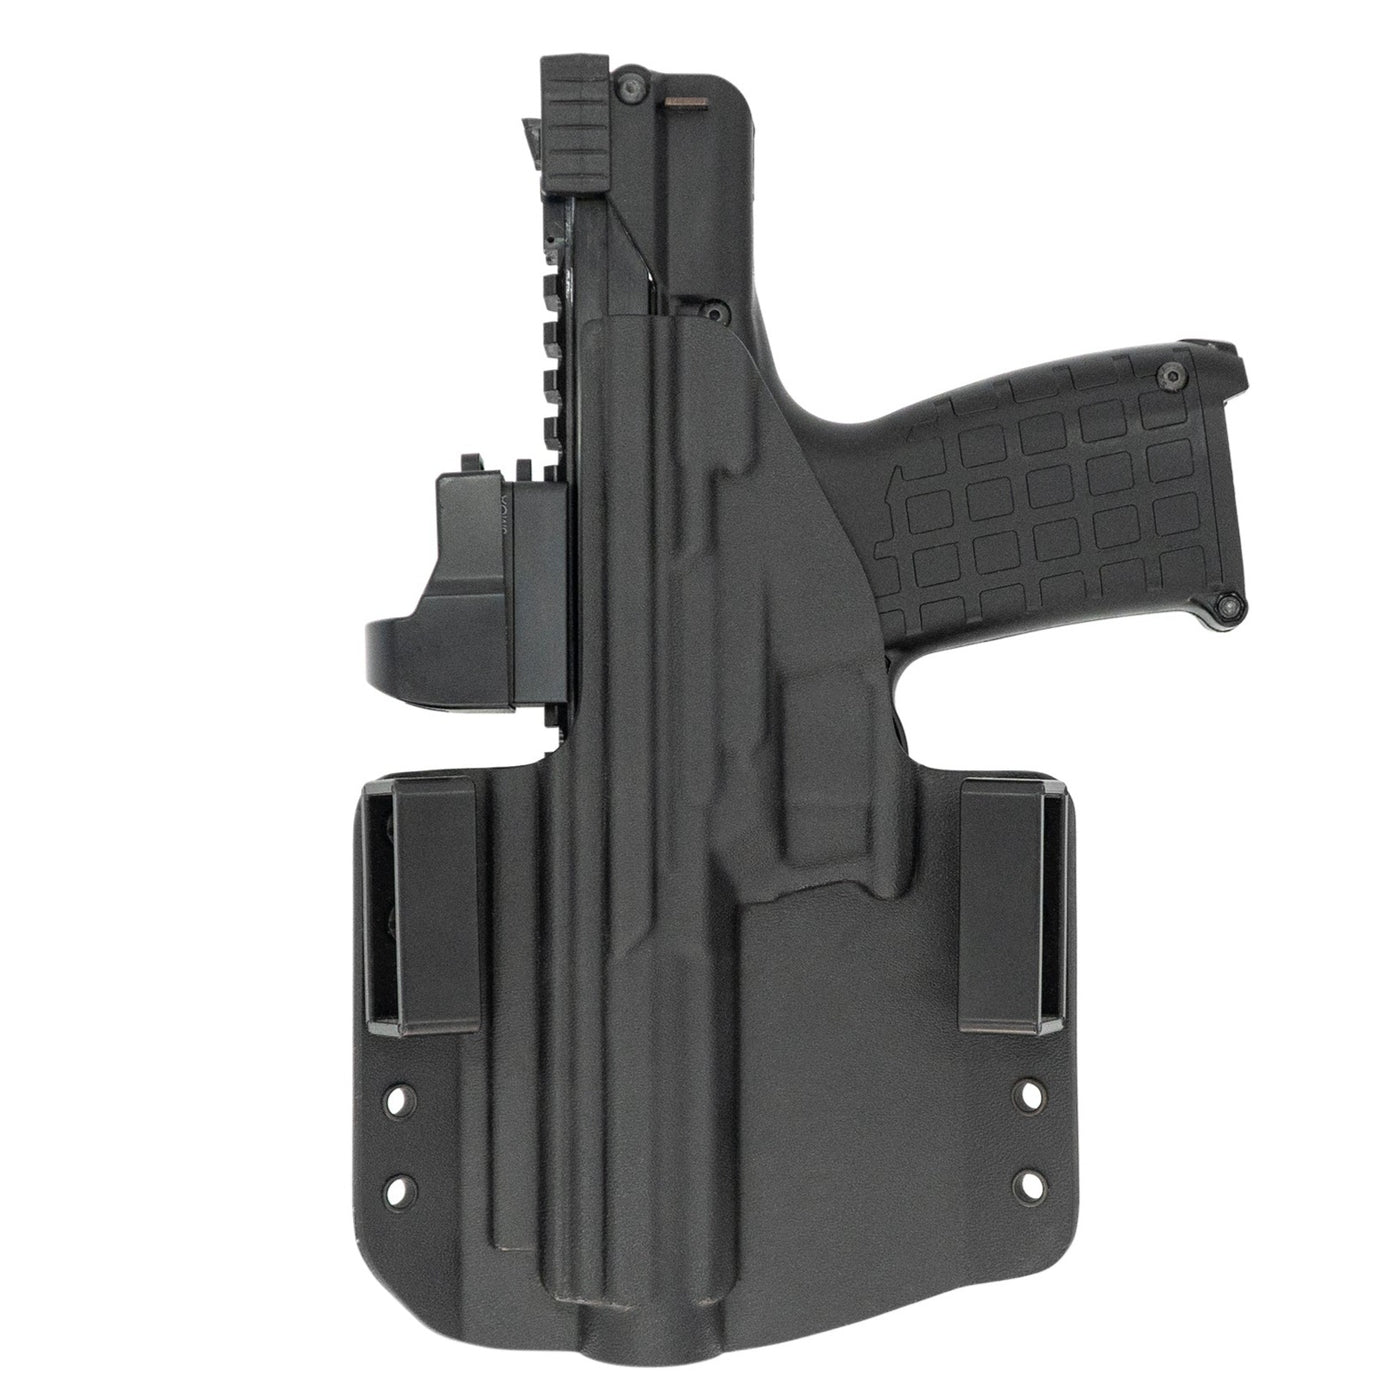 The custom C&G Holsters Outside the waistband for the Kel-Tec CP33 rear view